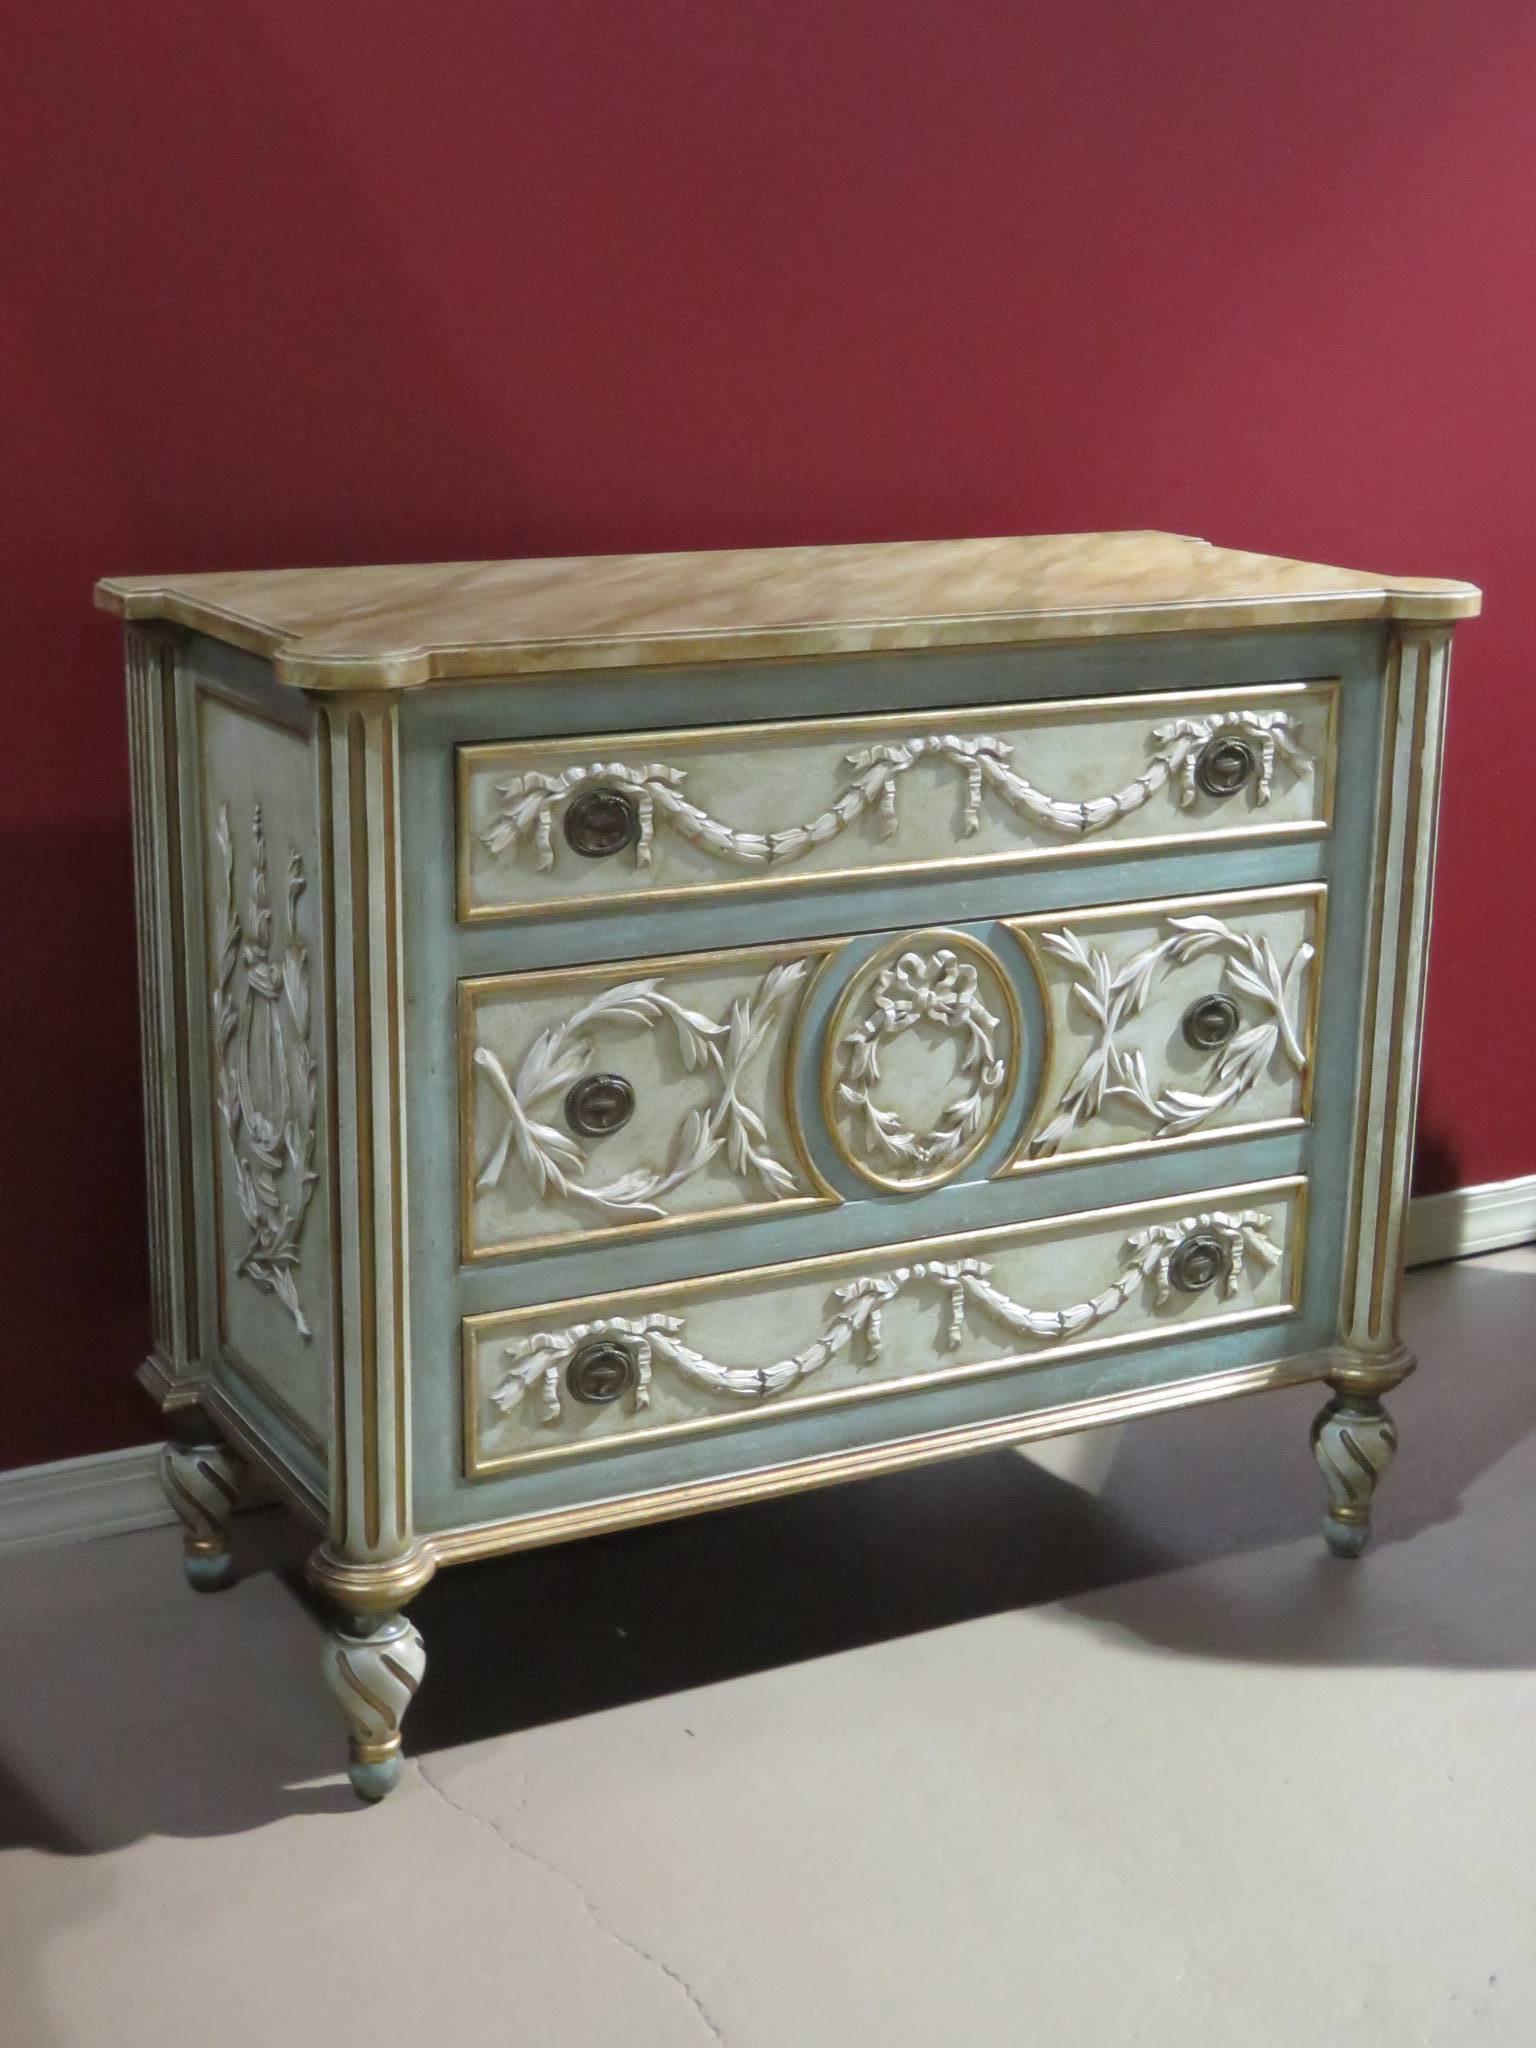 20th Century French Style Cream & Turquoise Painted Commode